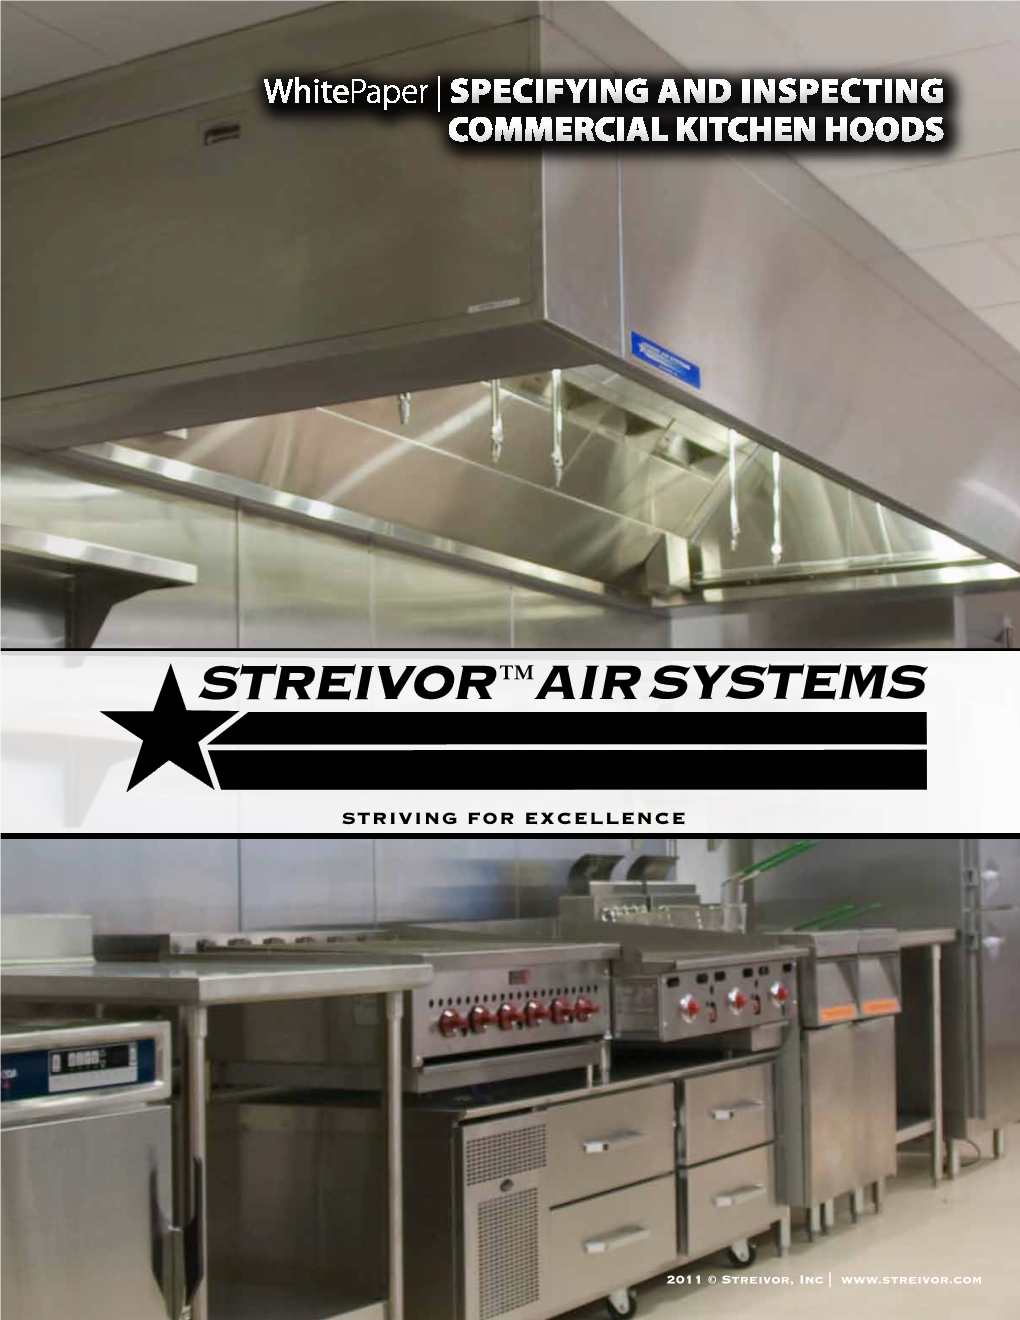 Specifying and Inspecting Commercial Kitchen Hoods